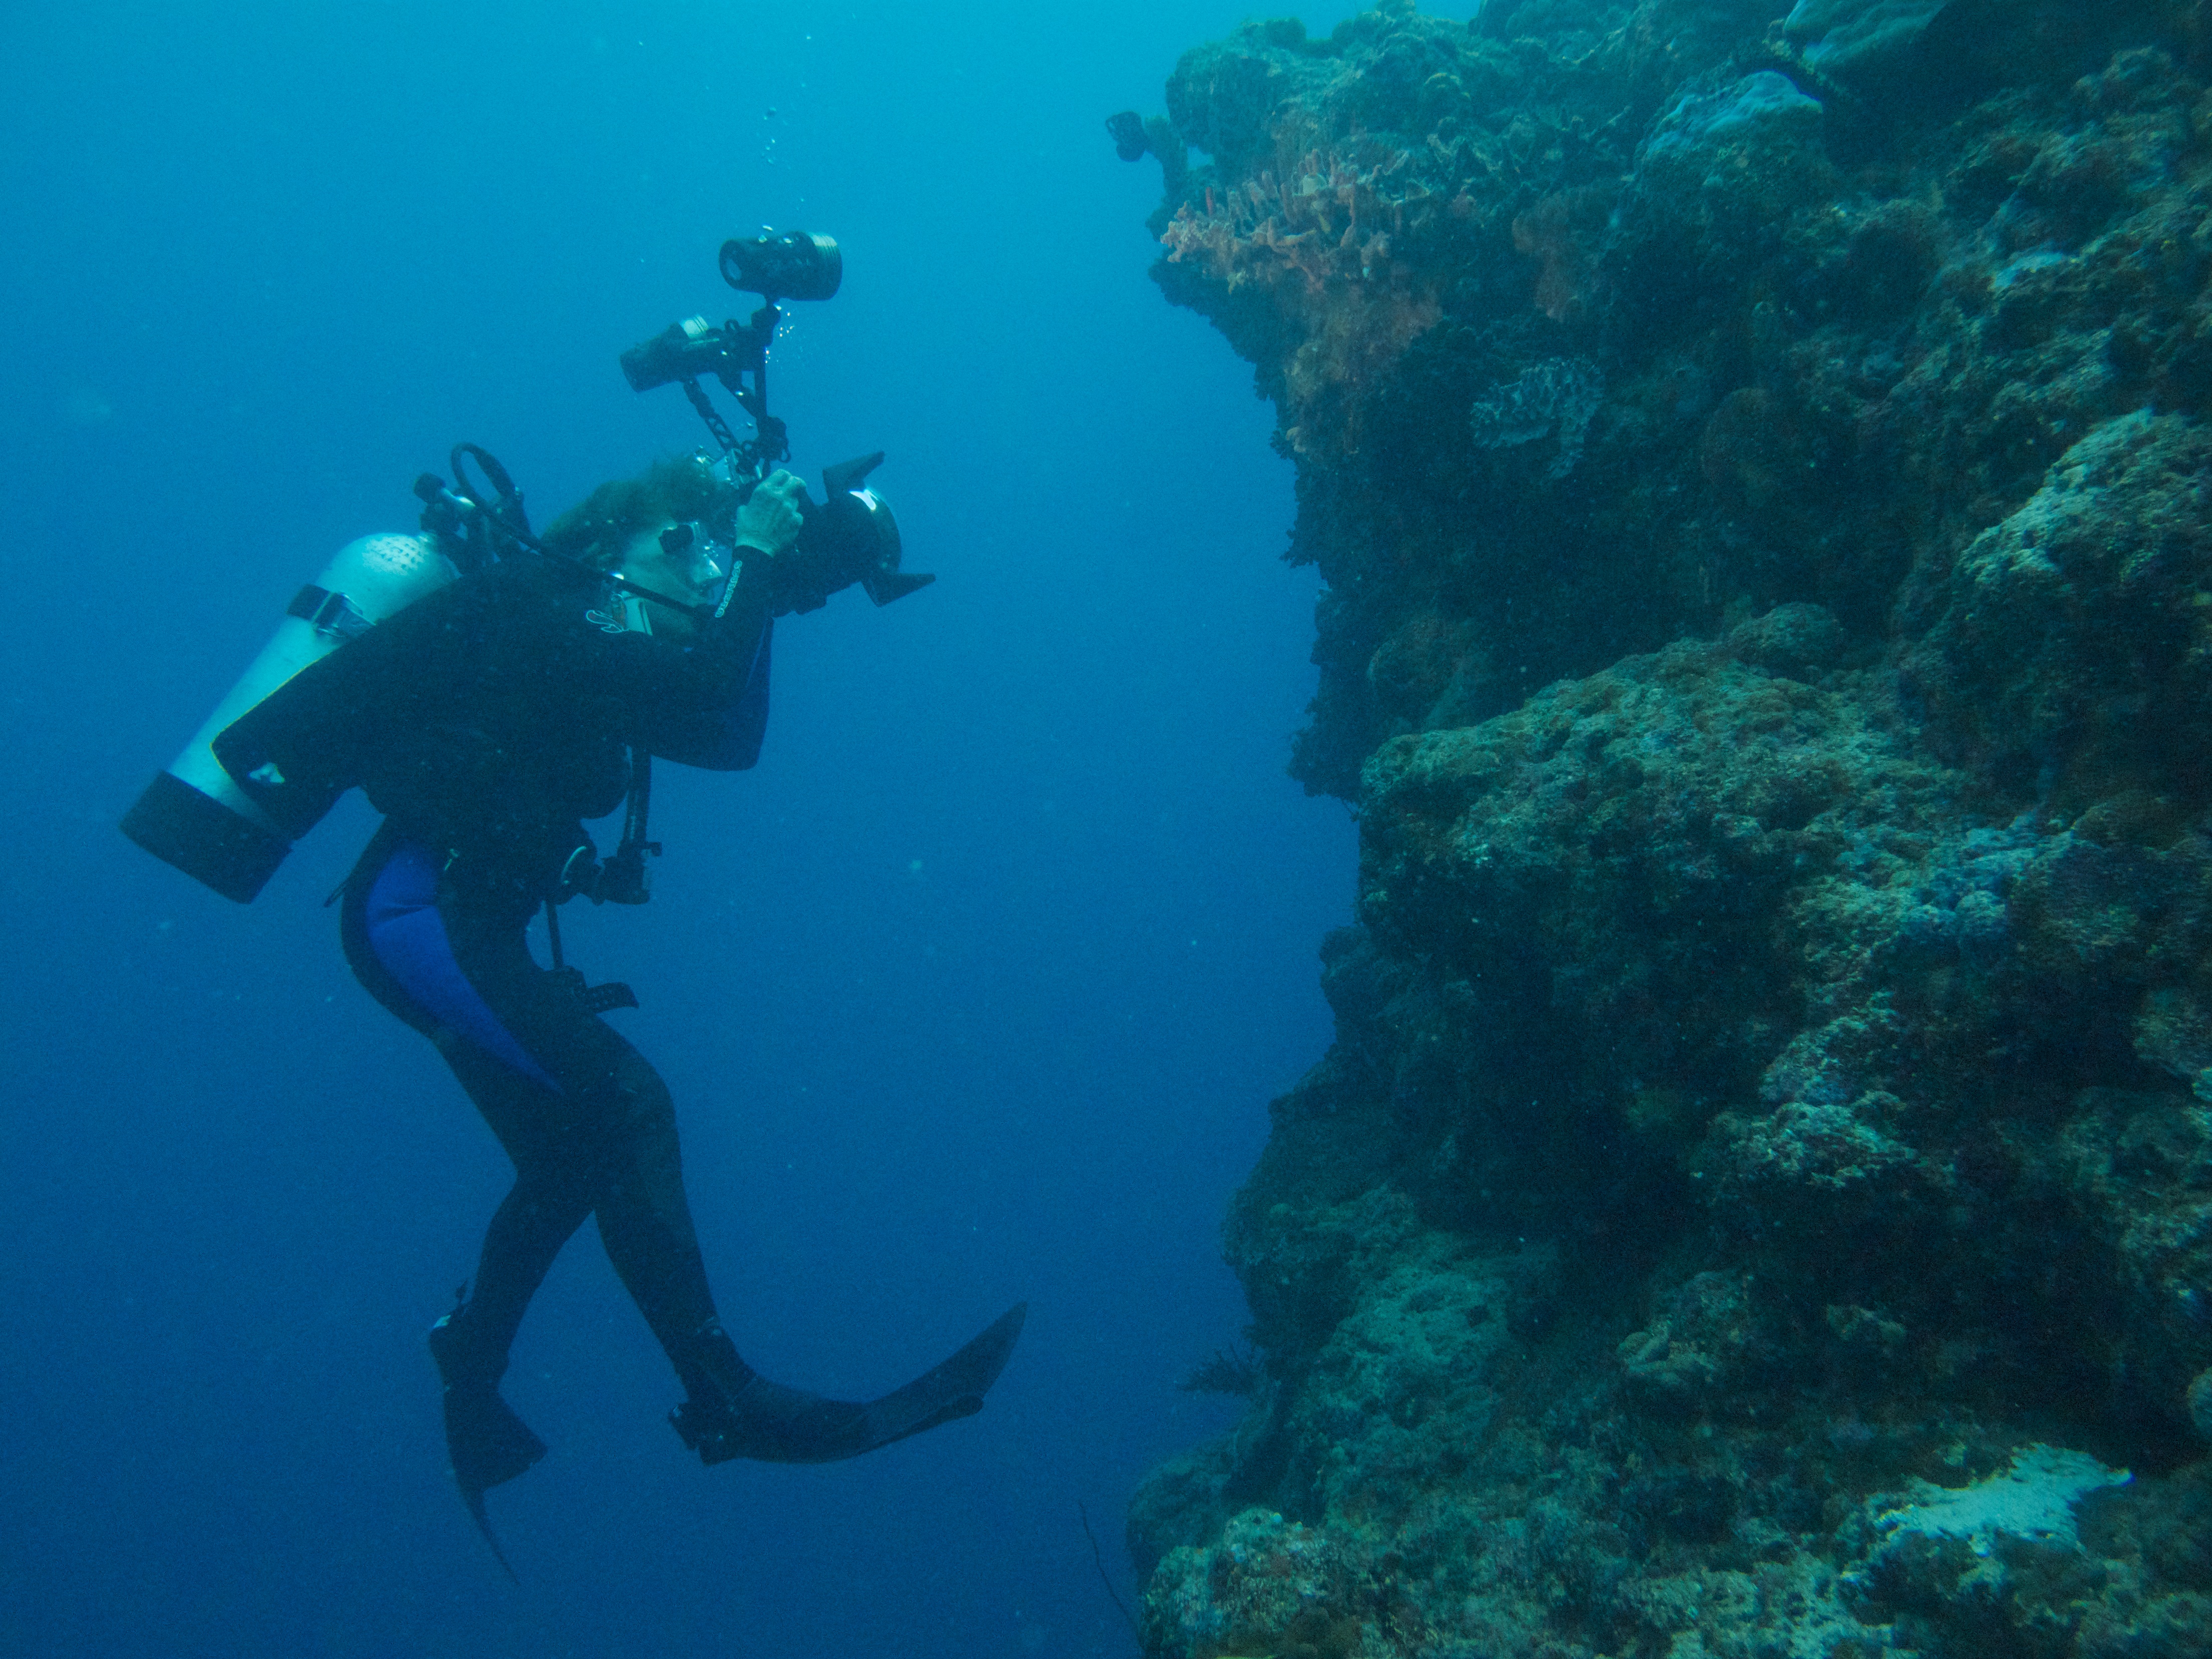 The new documentary Mission Blue, charts the life of oceanographer Sylvia Earle. Director Fisher Stevens set out to make a film about her work, and ended up being fascinated by the person. Photo: Mission Blue